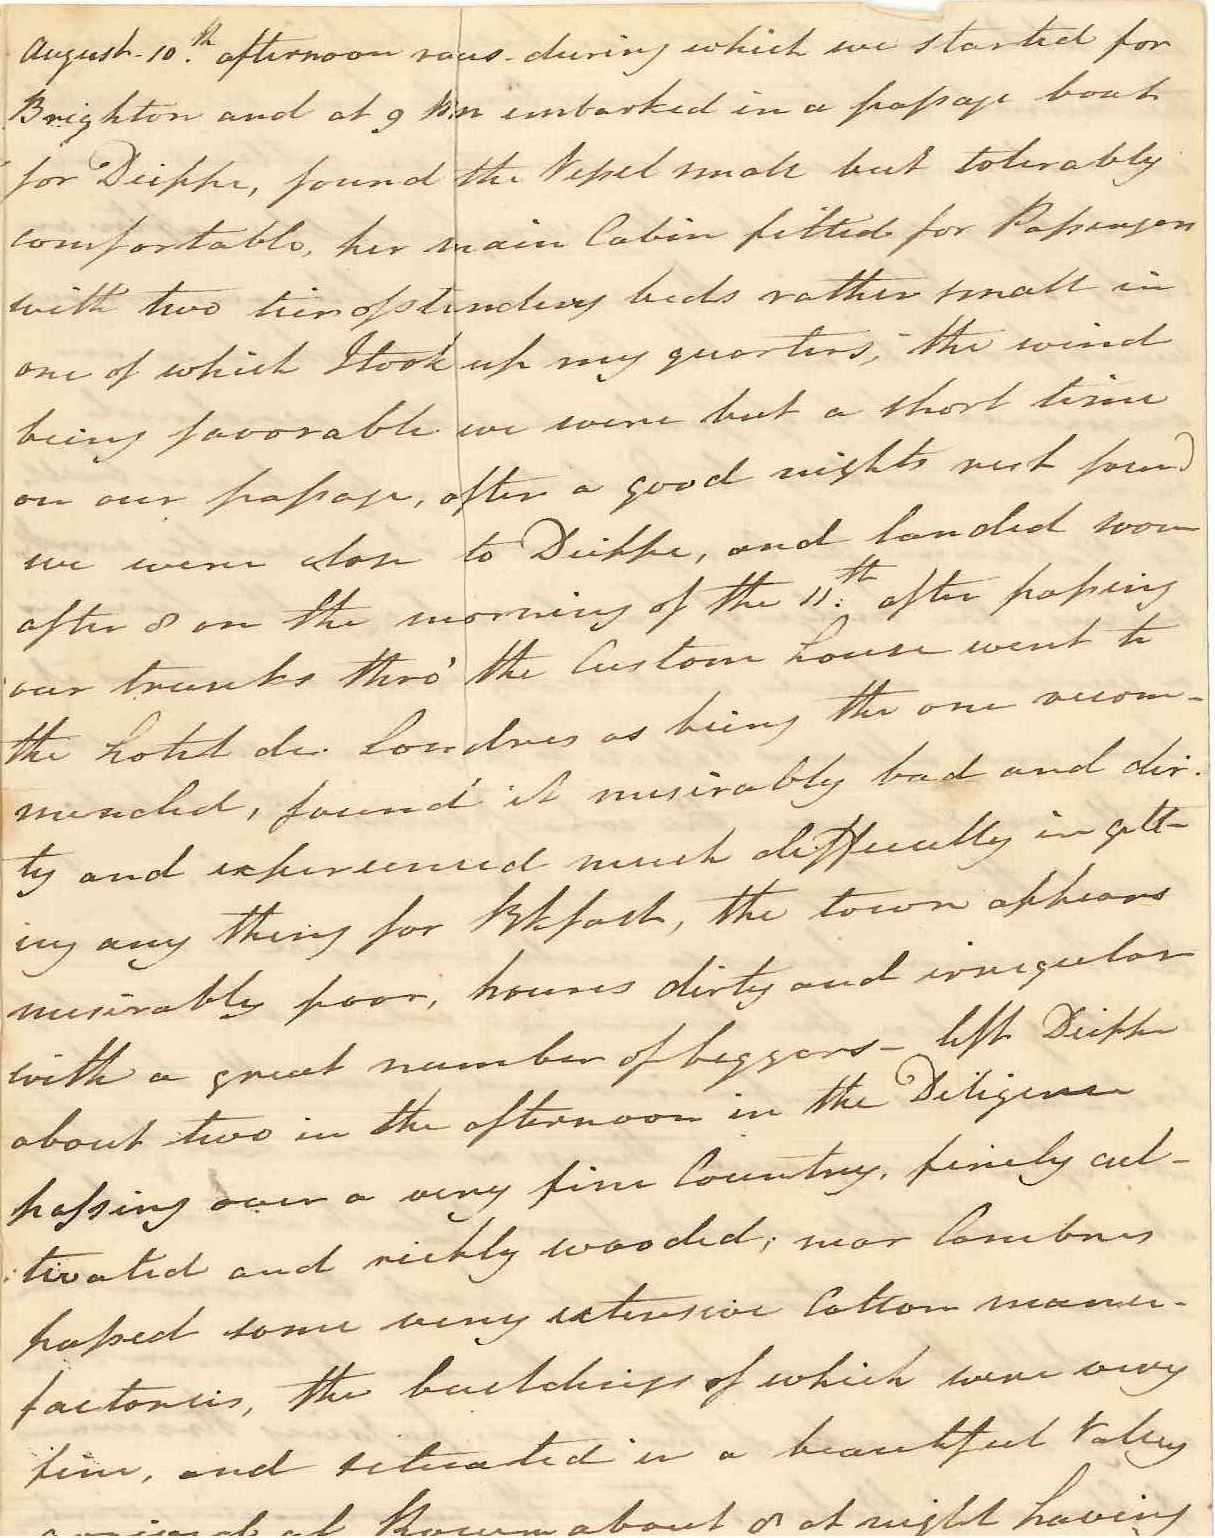 Account of a journey to Paris via Dieppe and Rouen by Henry Shiffner in 1815.